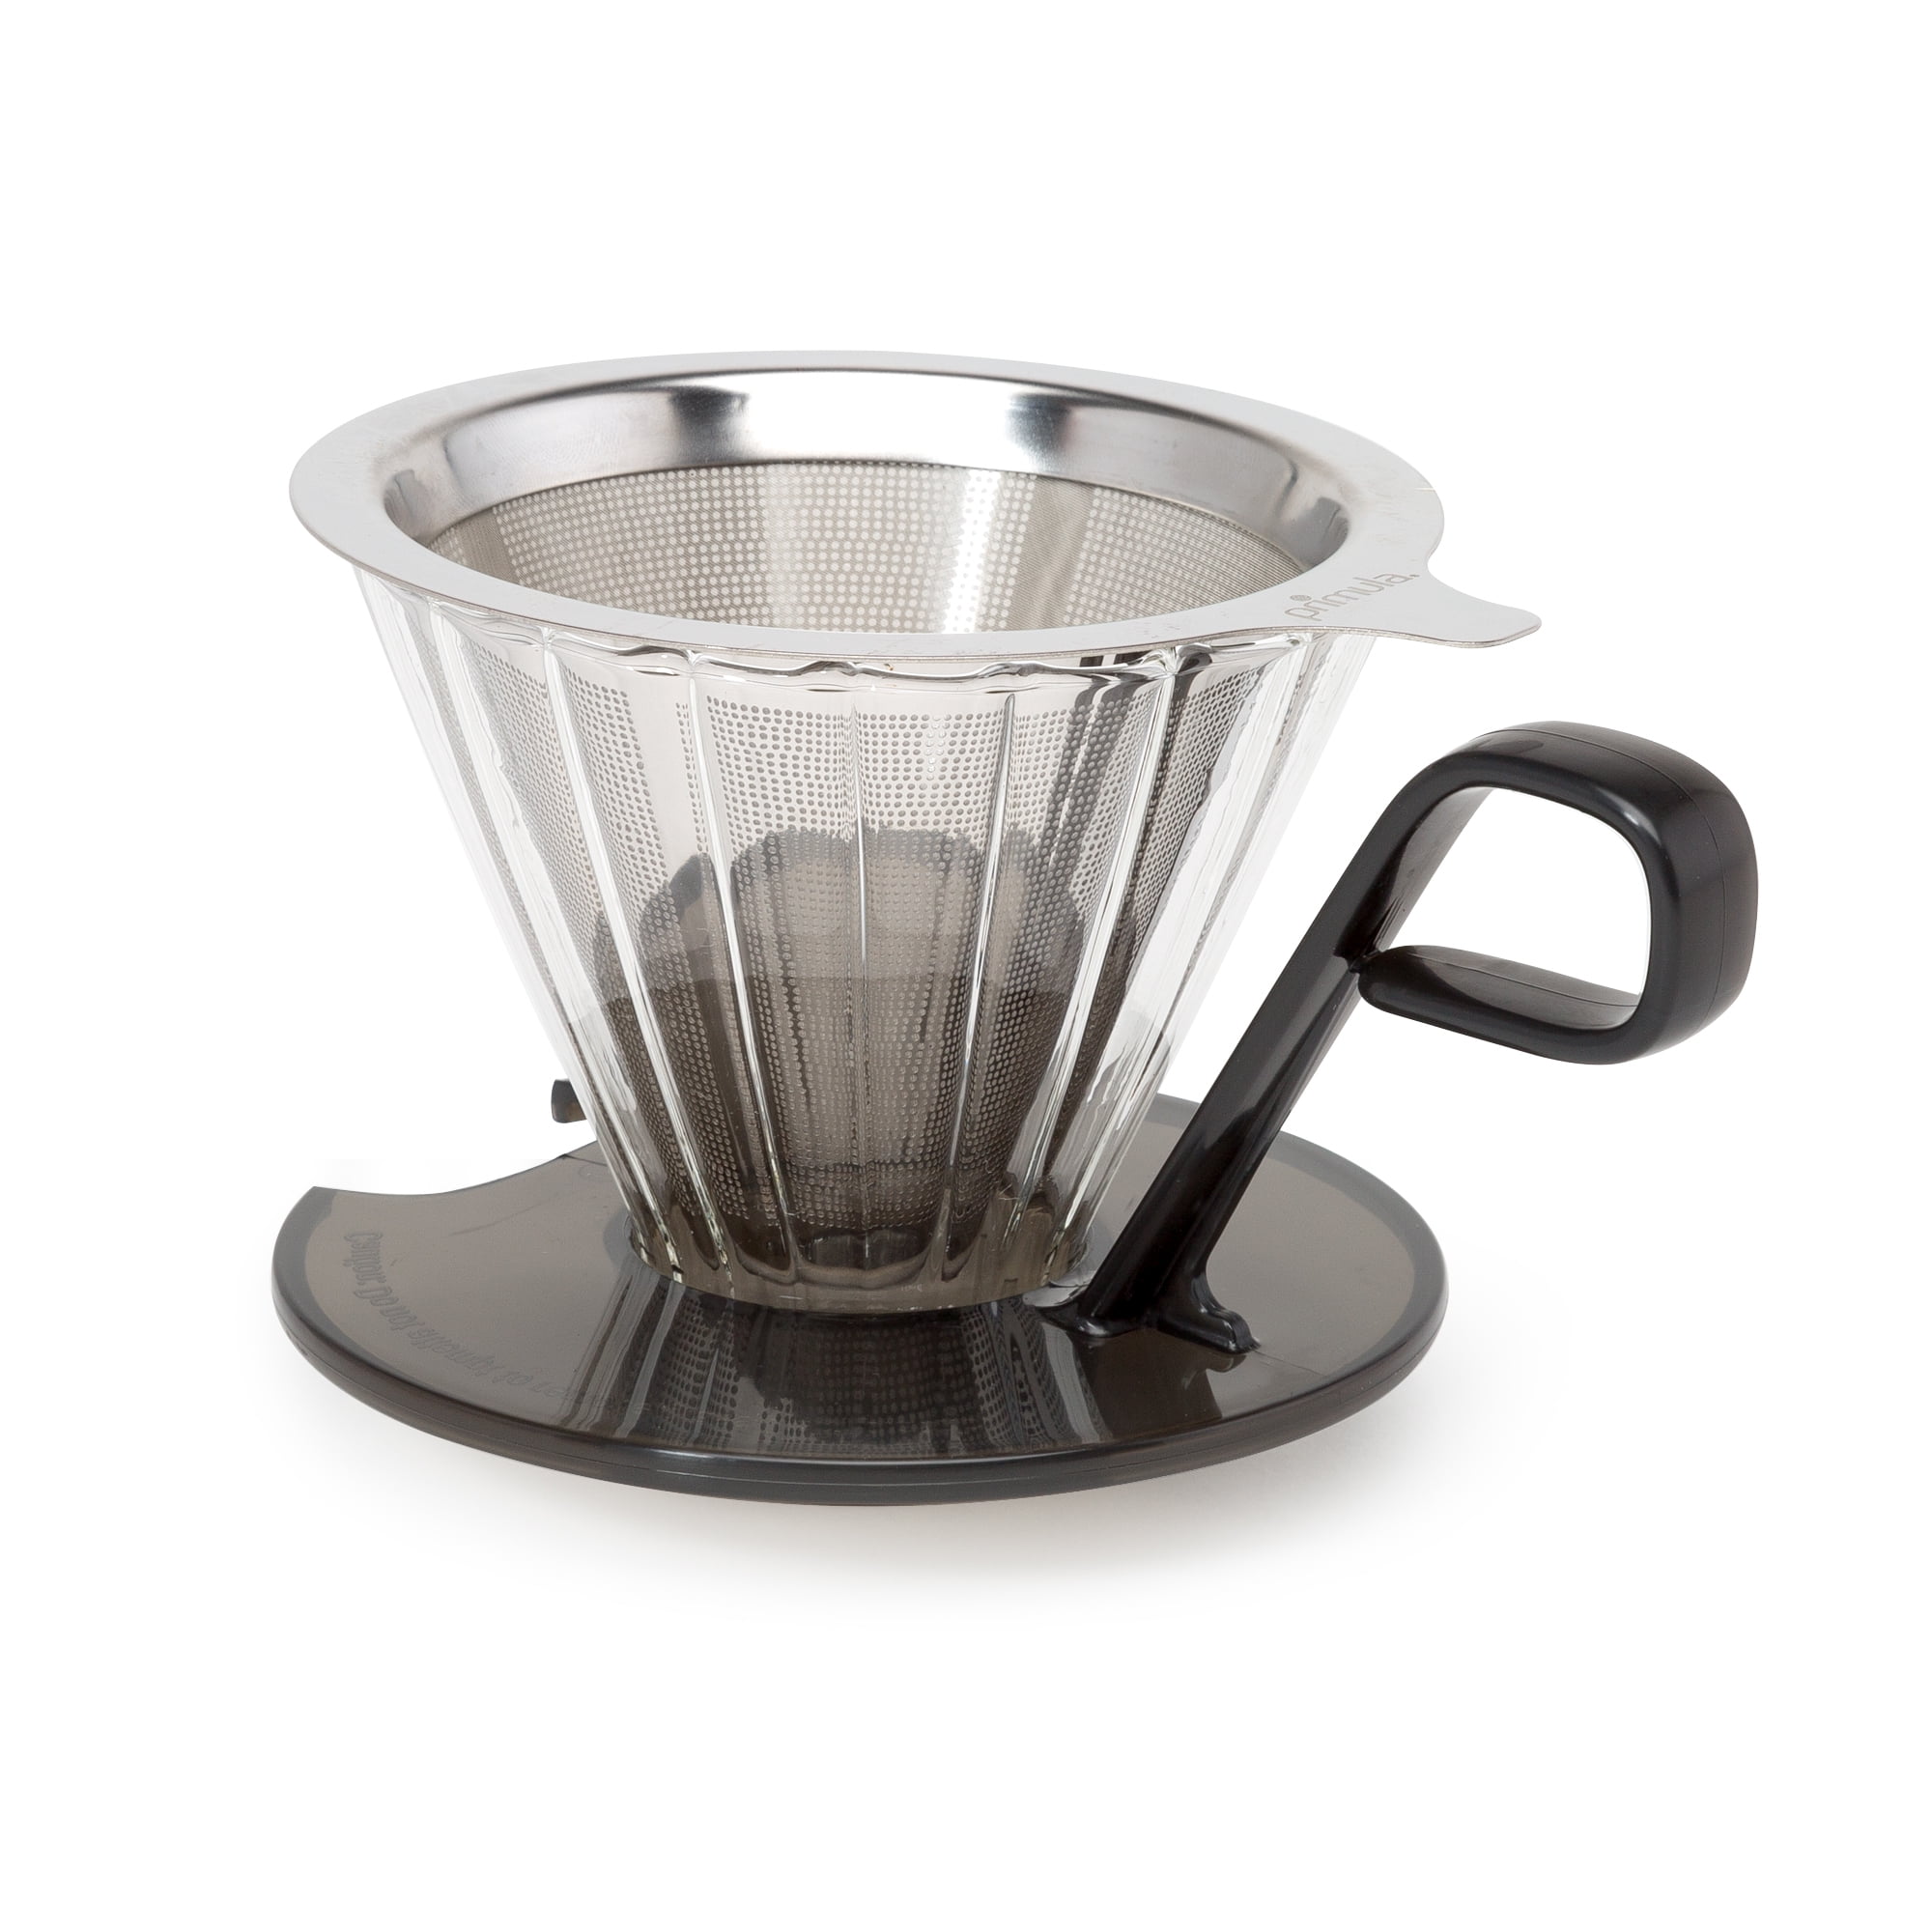 Melior 5 Cups 11767-10-01S 0.6 L Coffee Maker Permanent Filter Stainless Steel Mesh Bodum